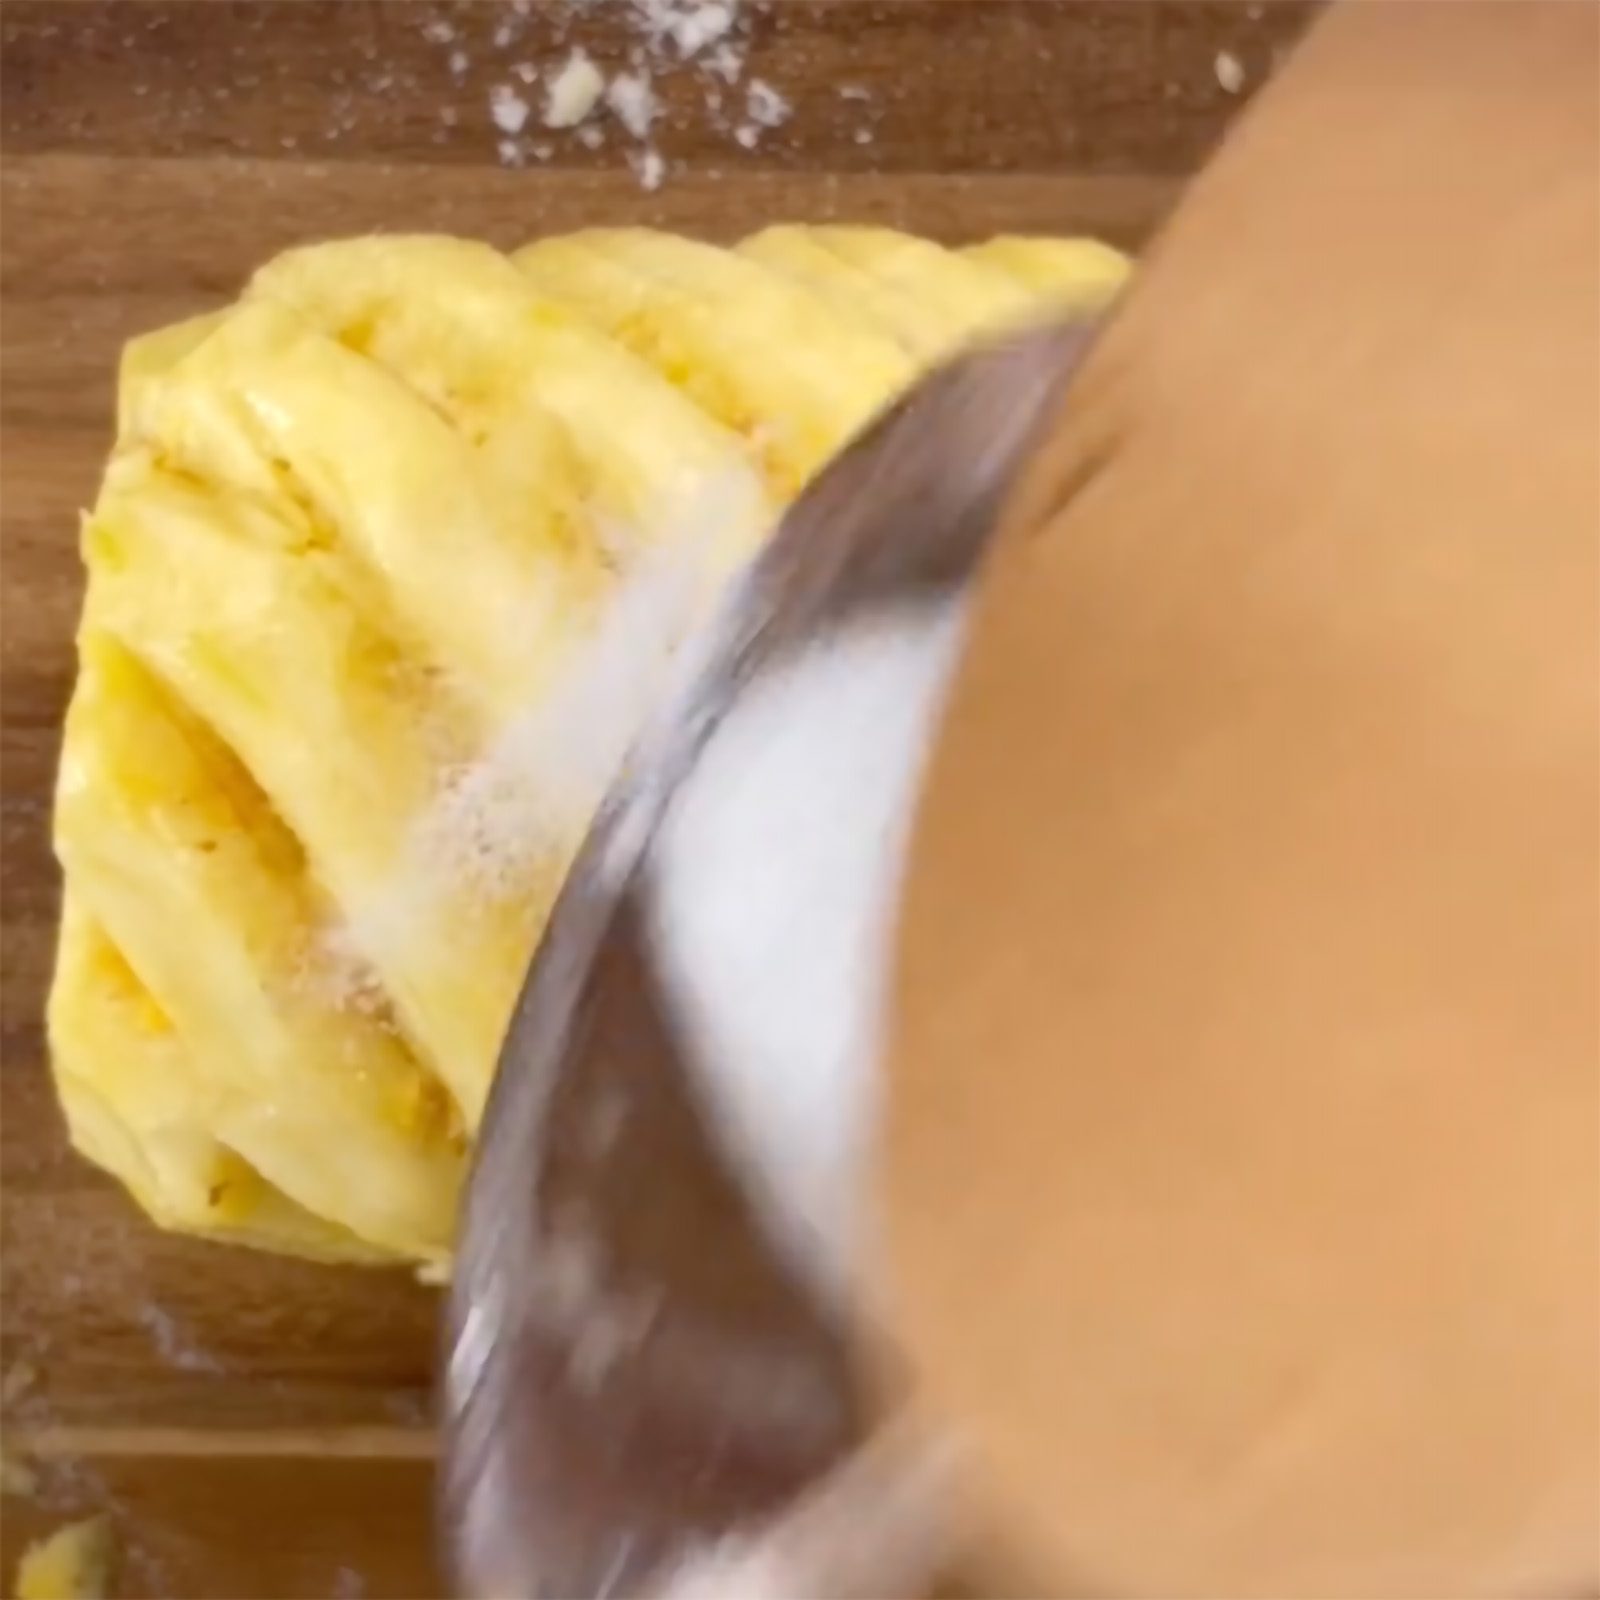 Take The Sting Out Of Pineapple With A Salt Water Soak